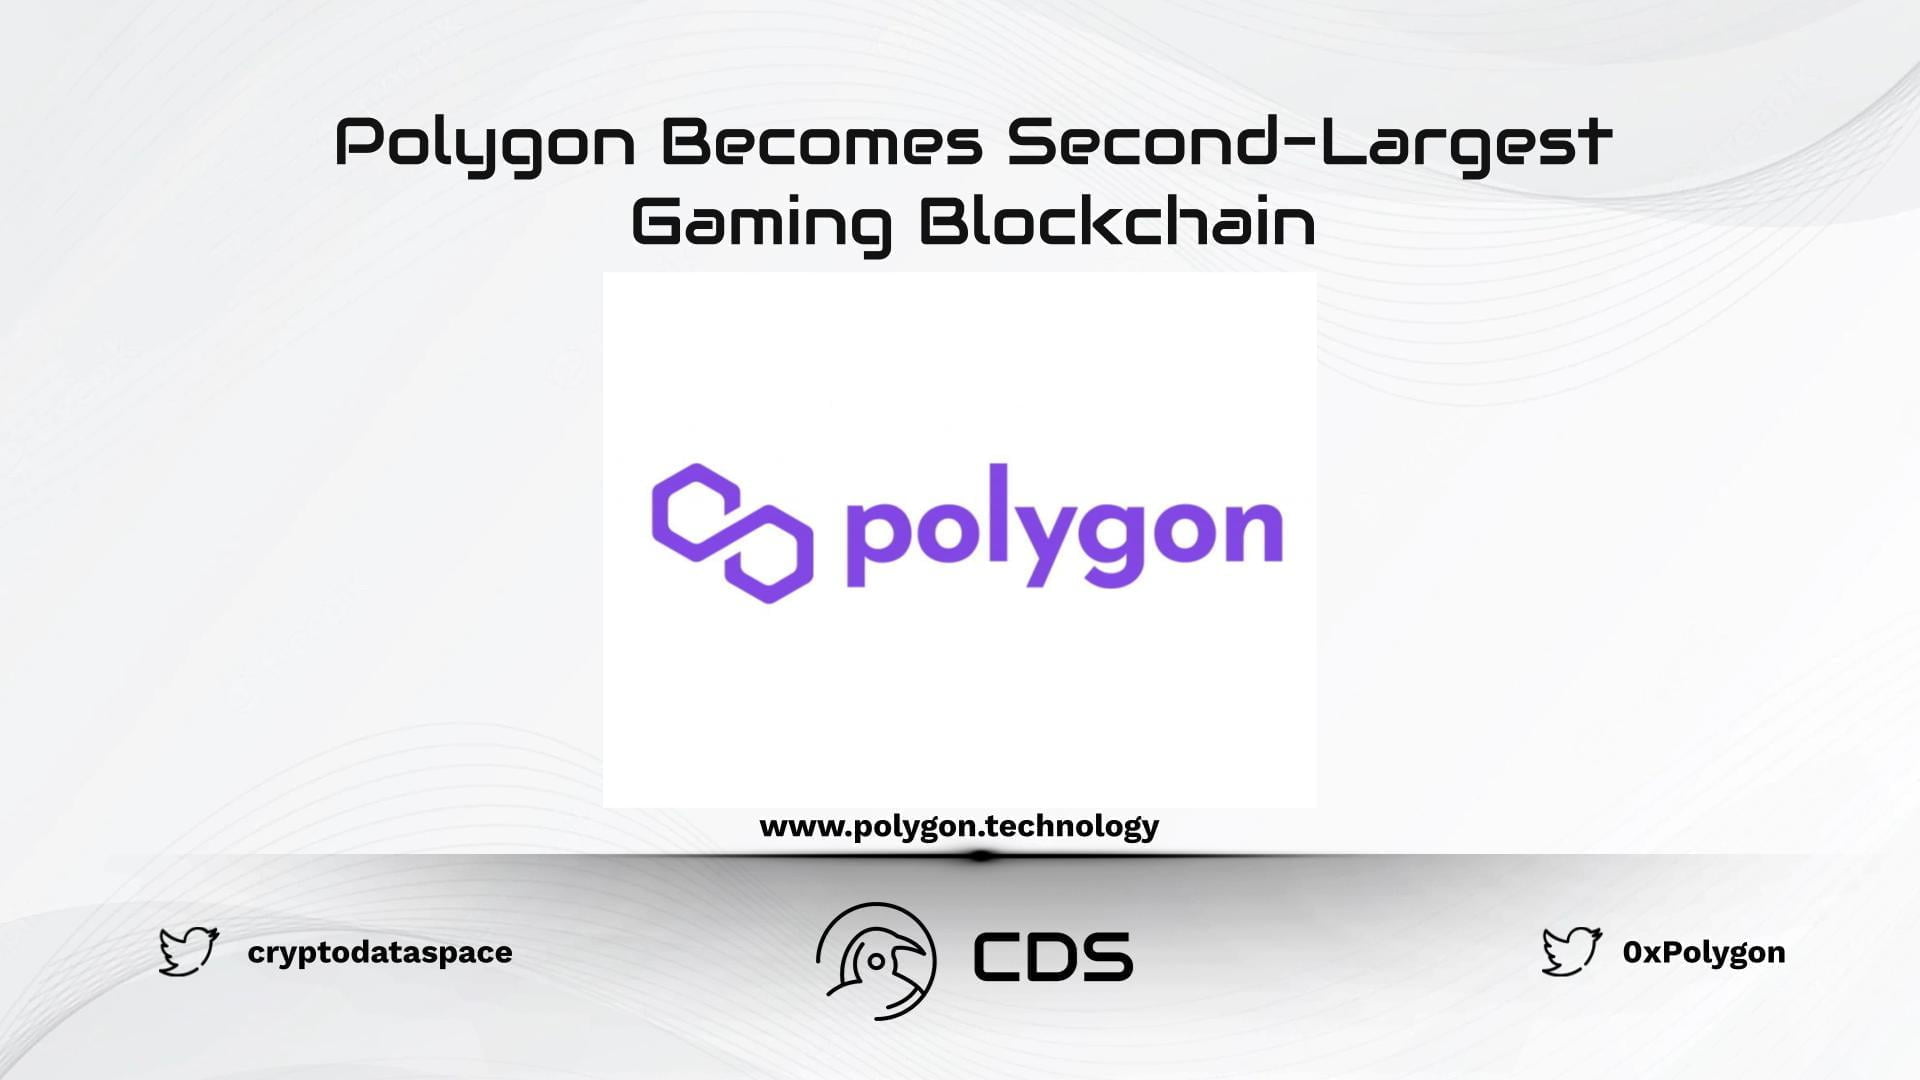 Polygon Becomes Second-Largest Gaming Blockchain